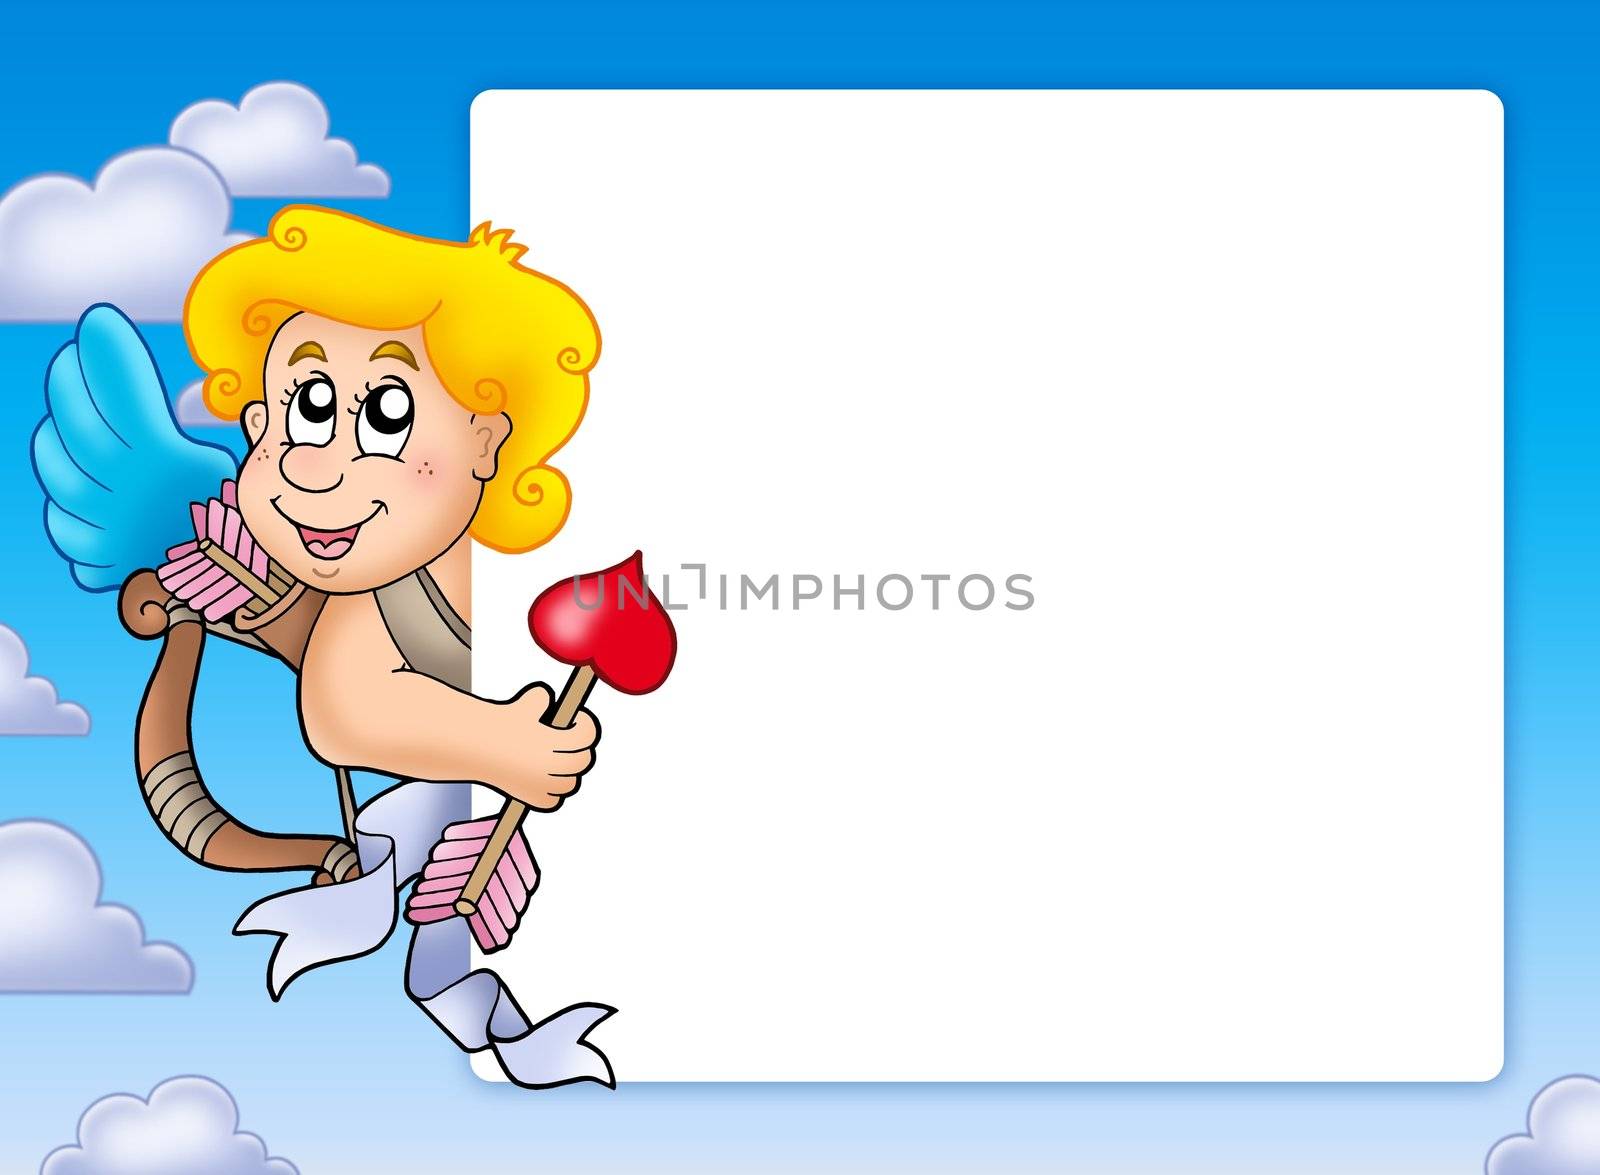 Valentine frame with happy Cupid 3 - color illustration.